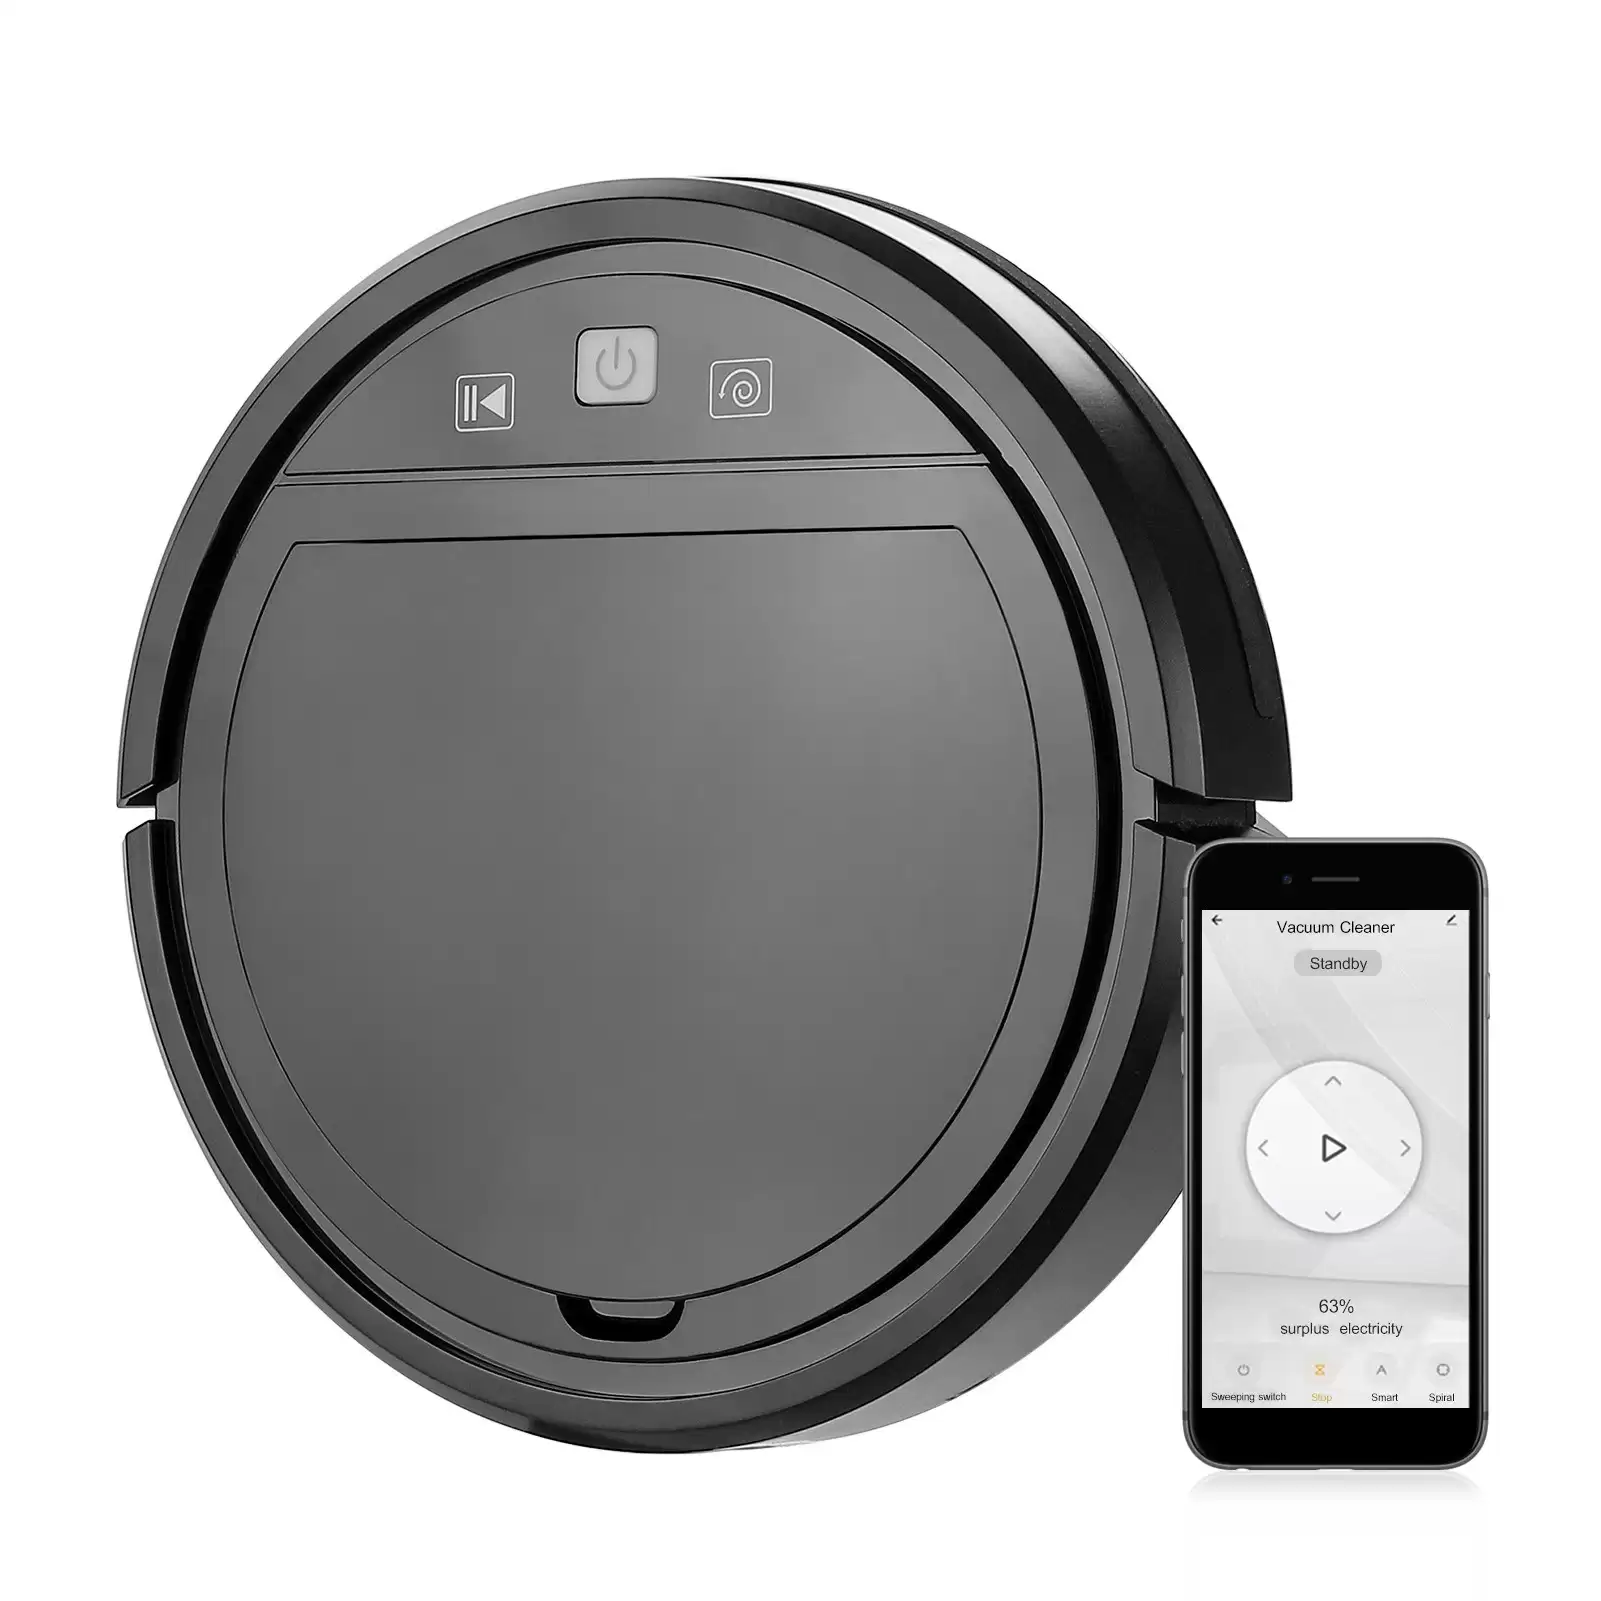 Get Extra 56% Discount On Wifi 3-in-1 Robotic Cleaner, Limited Offer With This Discount Coupon At Tomtop